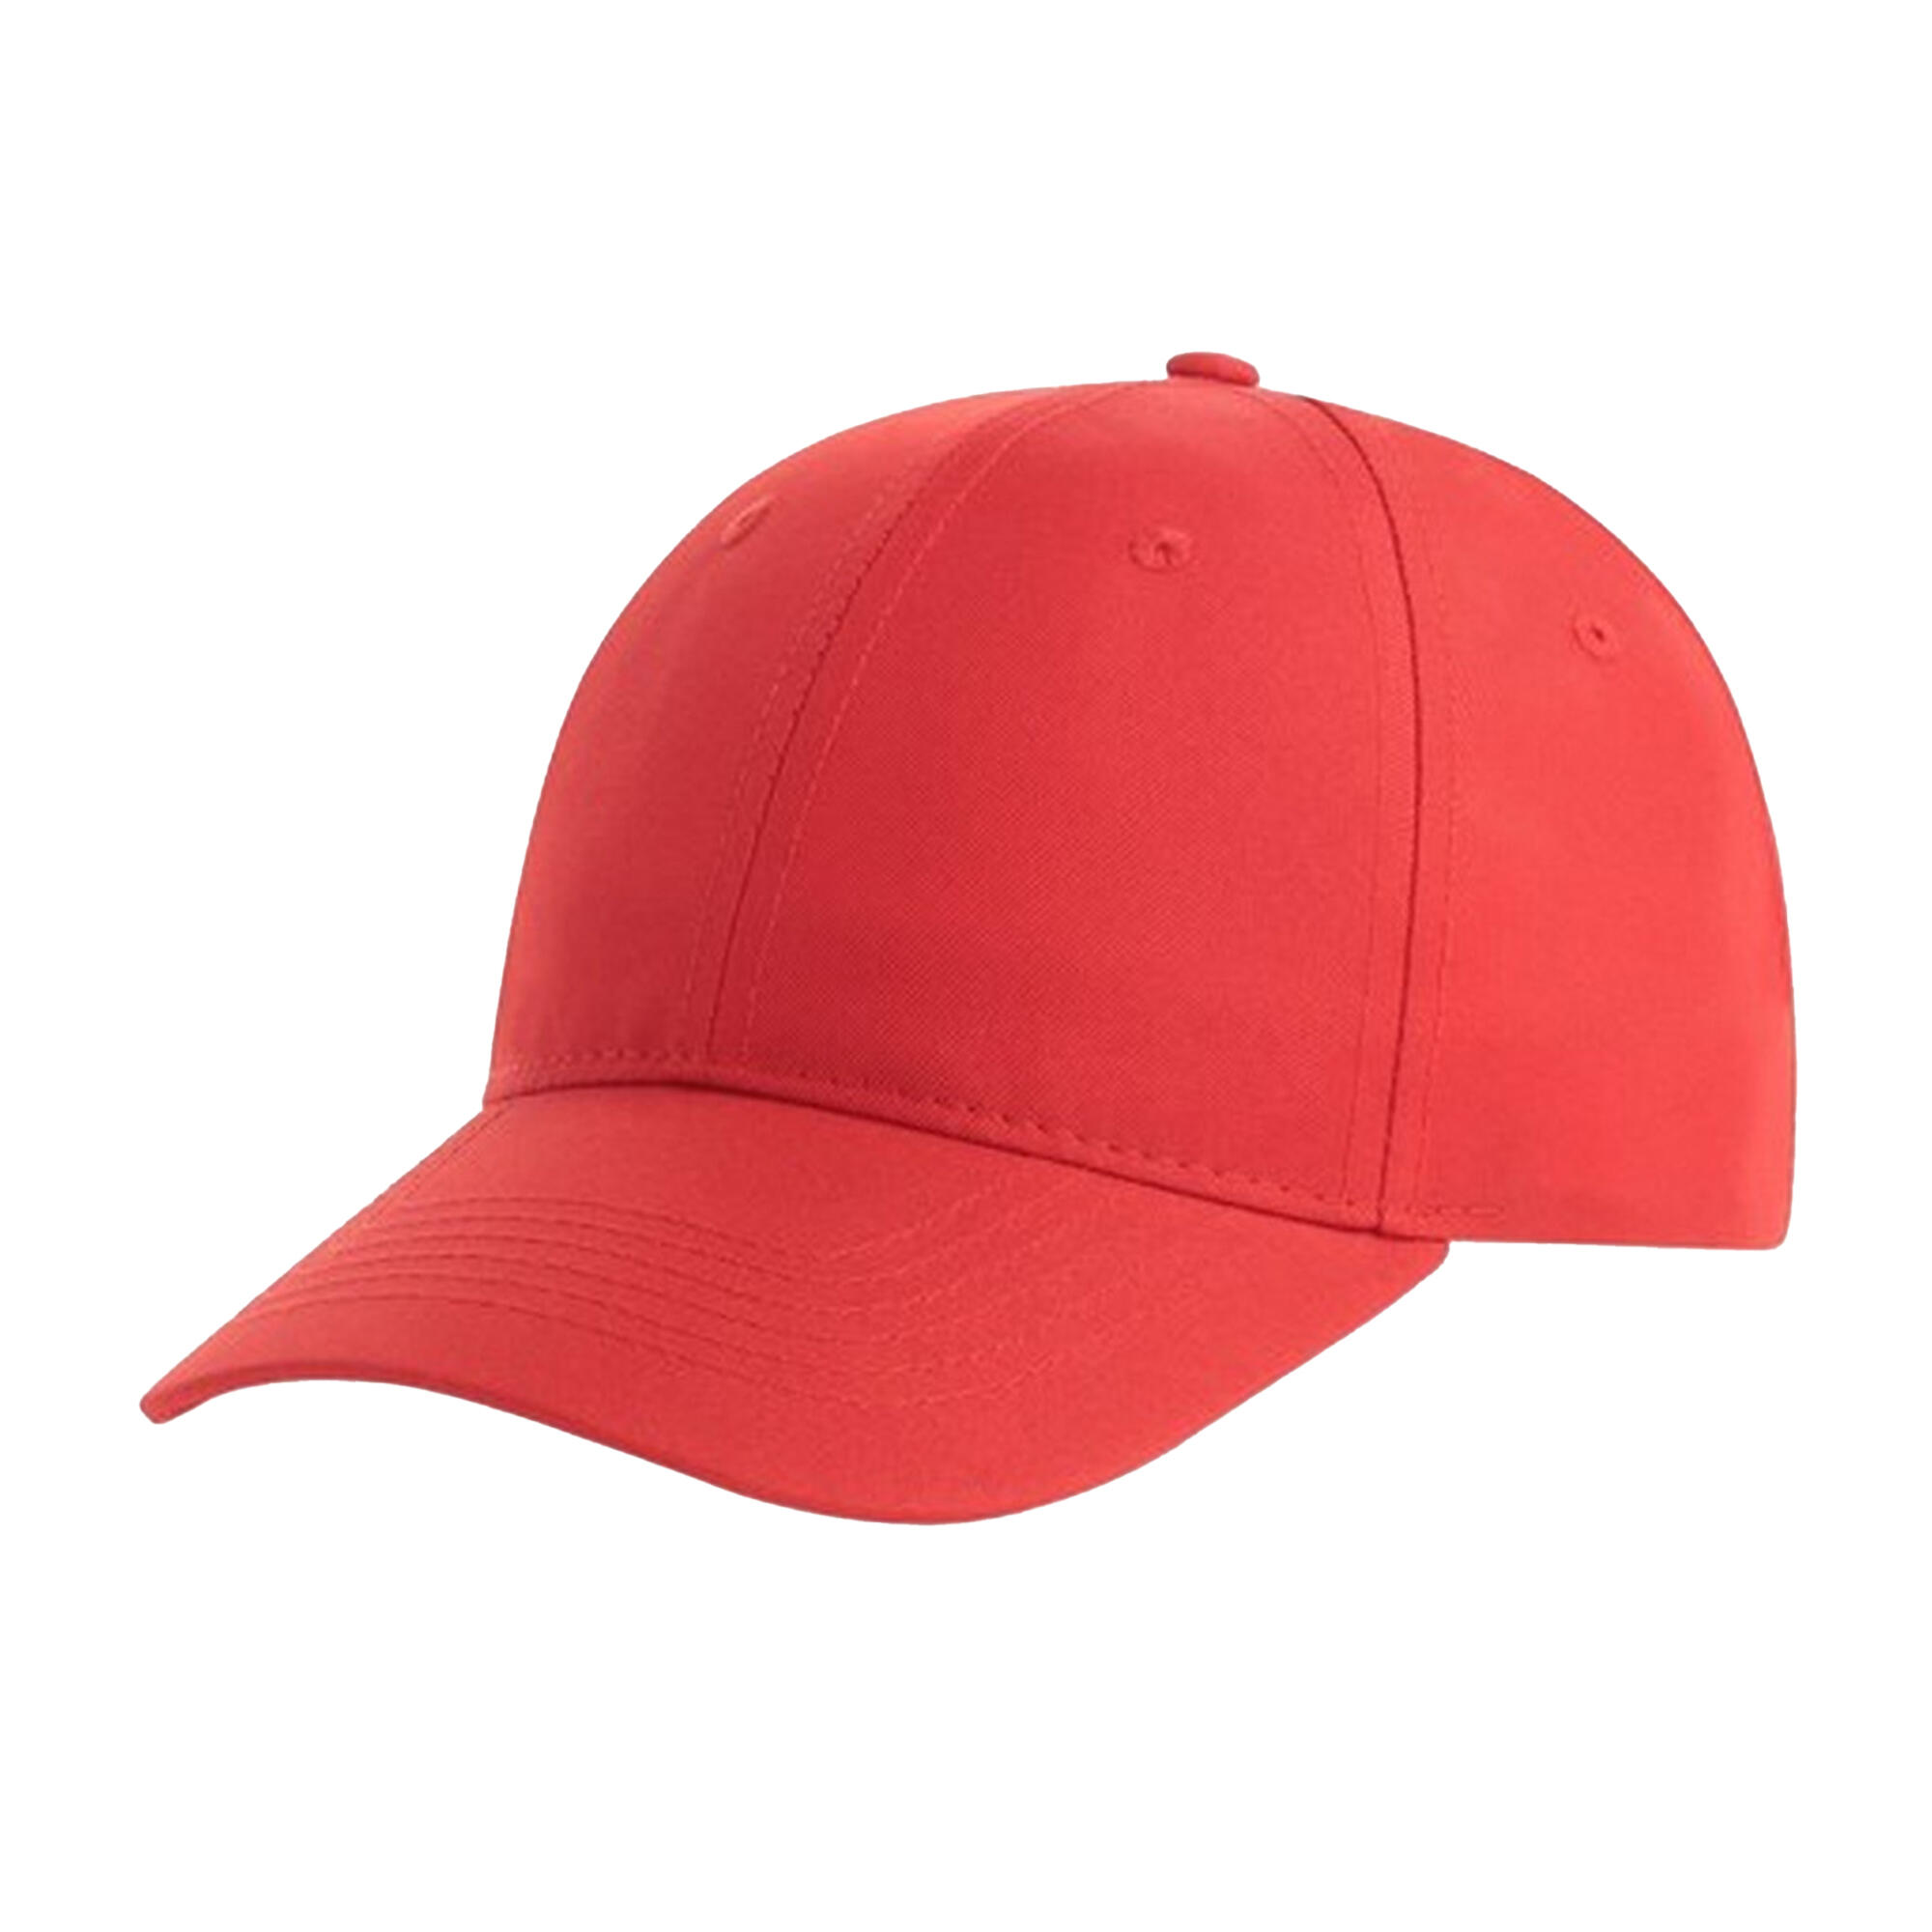 ATLANTIS Recy Six Recycled Polyester Baseball Cap (Red)